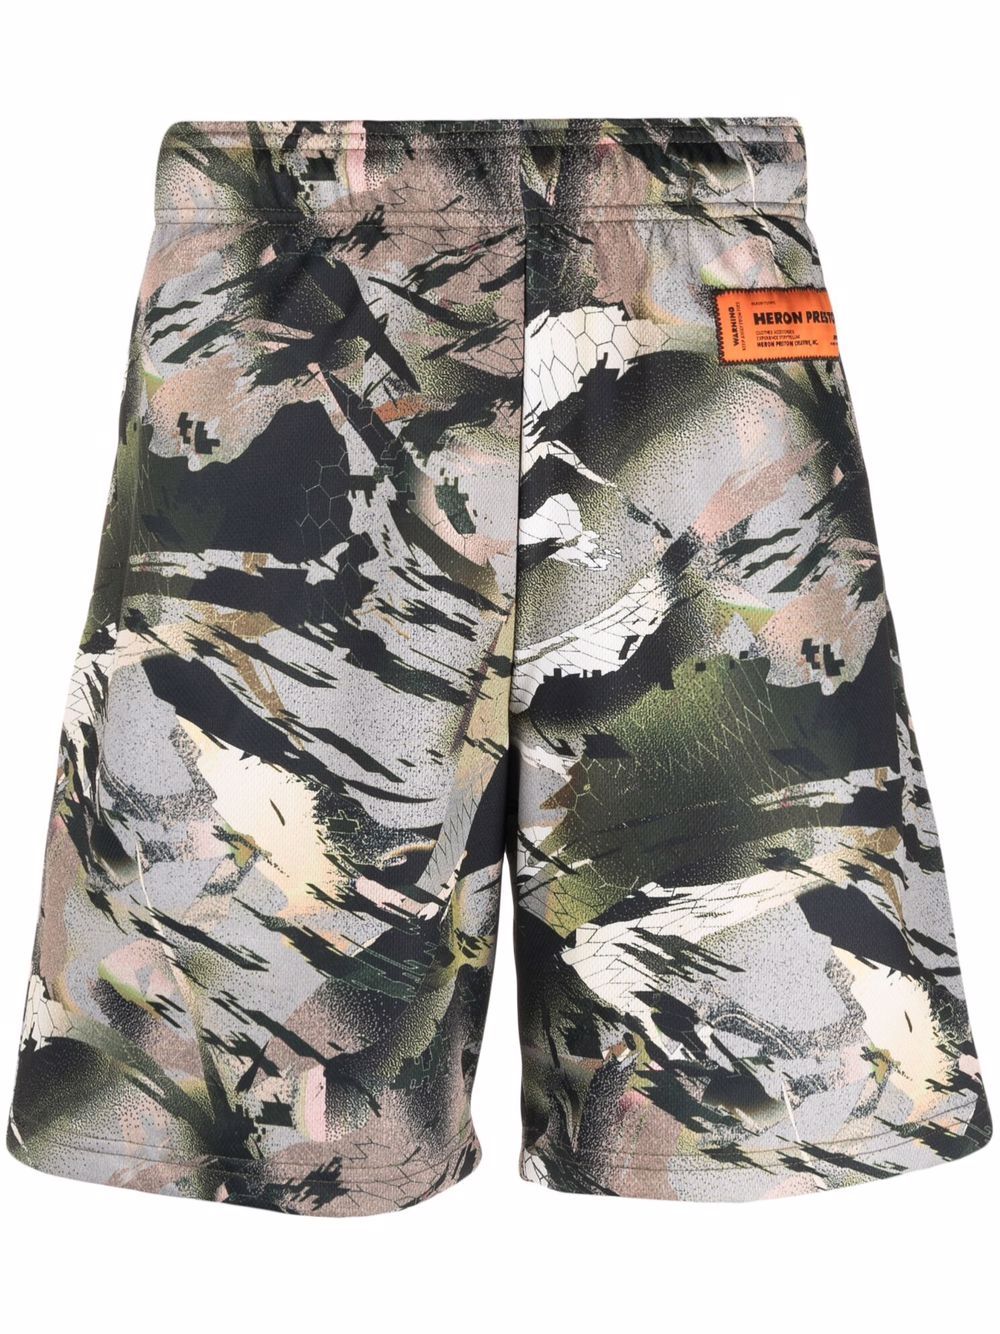 dry fit camouflage pattern shorts